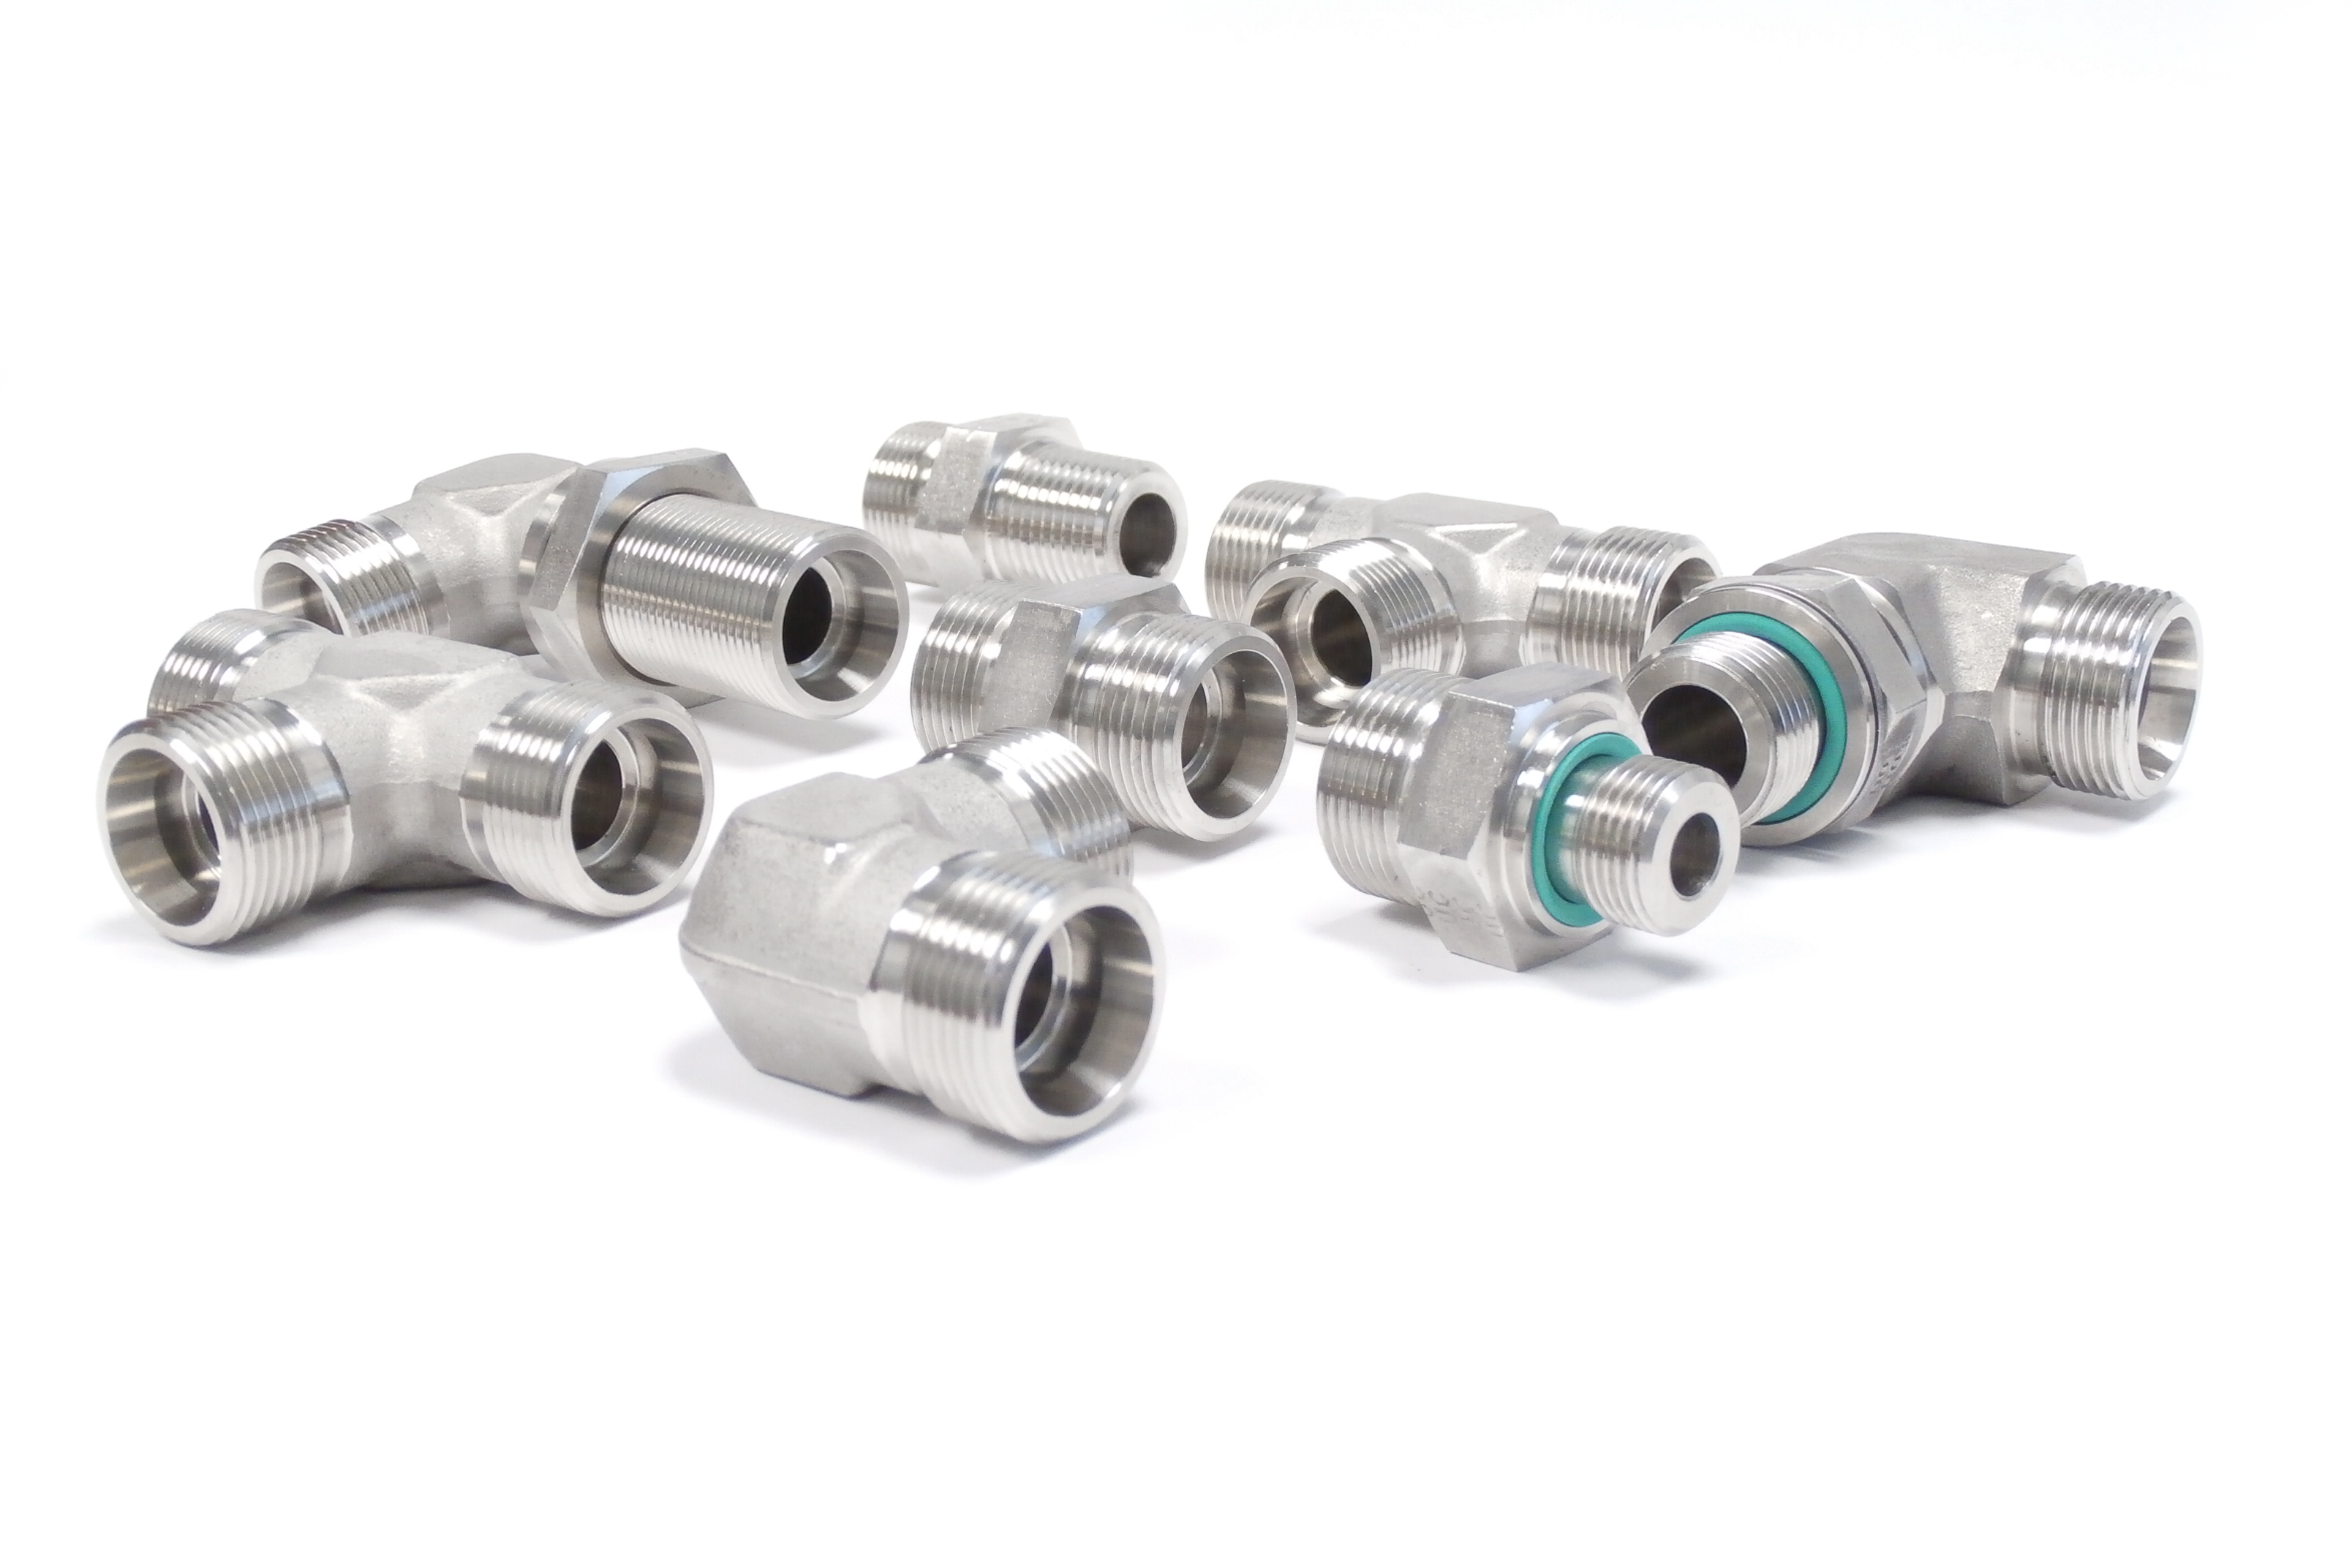 DIN 2353 Metric Bite-Type Fittings and Valves